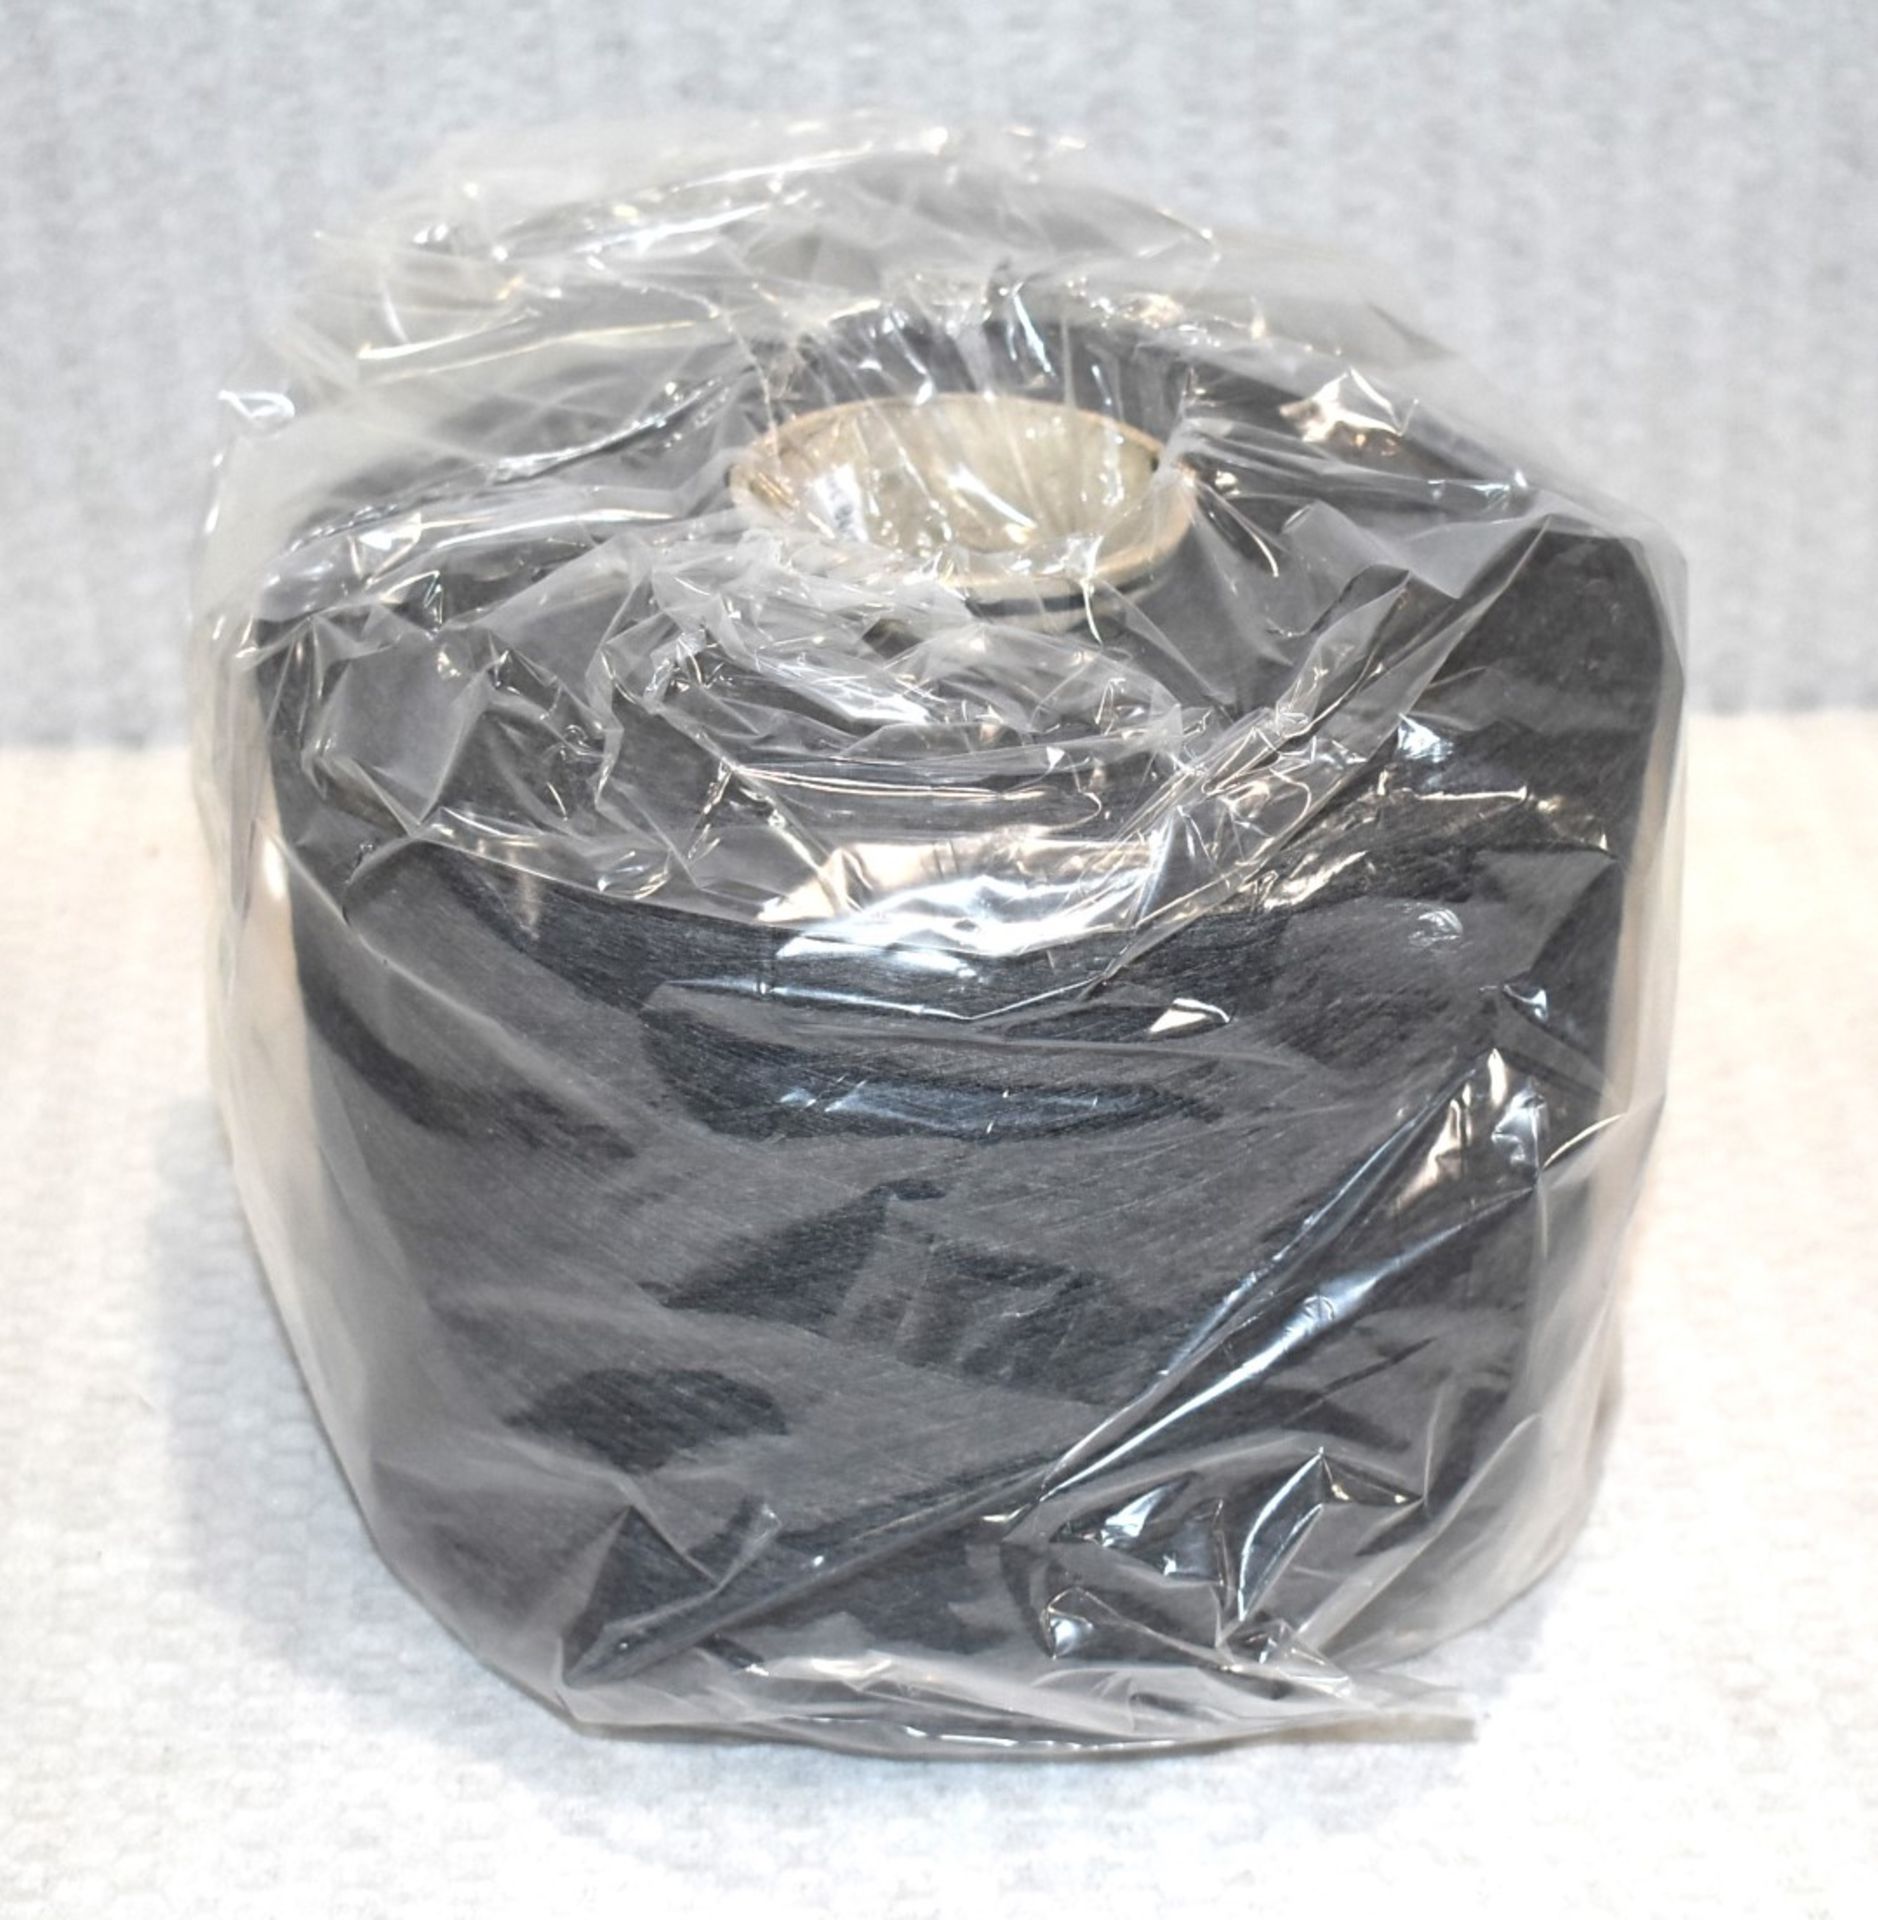 18 x Cones of 1/13 MicroCotton Knitting Yarn - Mid Grey - Approx Weight: 2,500g - New Stock ABL Yarn - Image 12 of 16